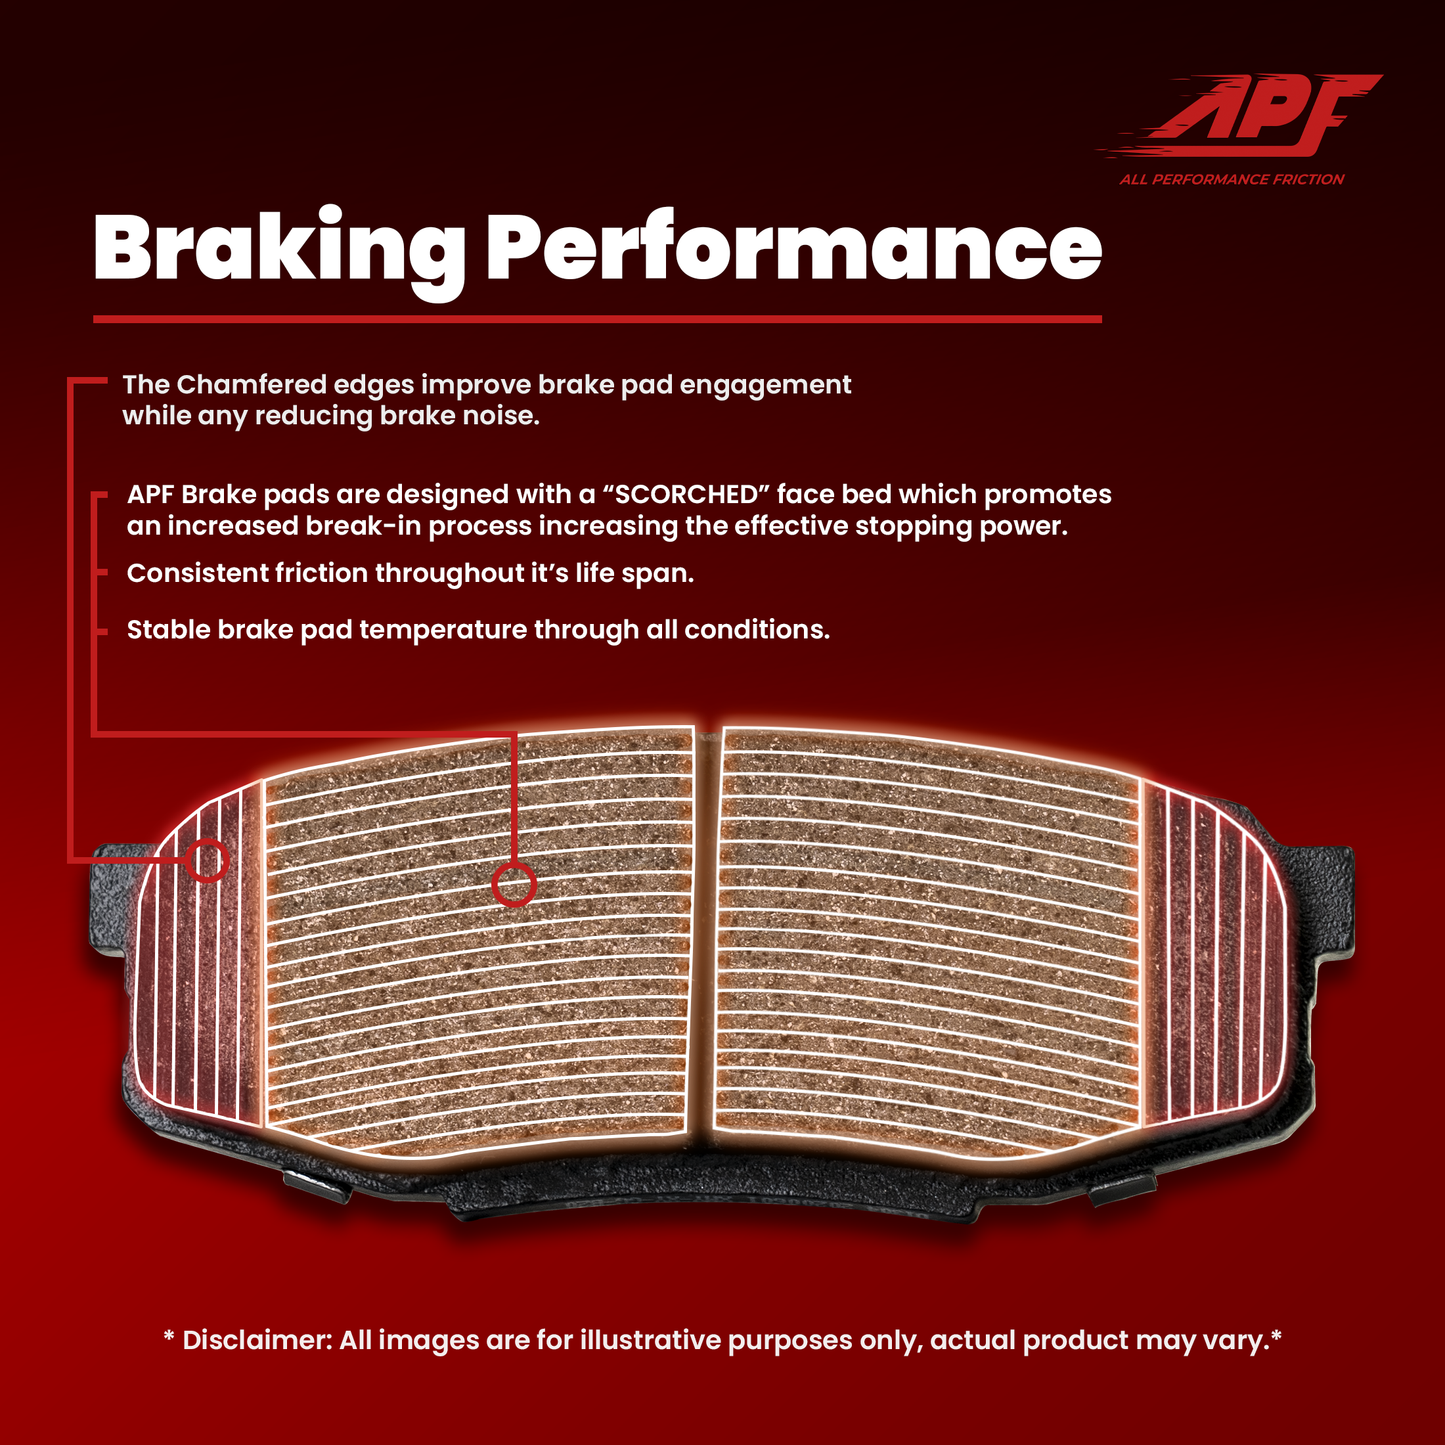 APF All Performance Friction Rear Rotors and Pads Half Kit compatible with Lincoln MKX 2007-2010 Zinc Drilled Slotted Rotors with Ceramic Carbon Fiber Brake Pads | $140.17